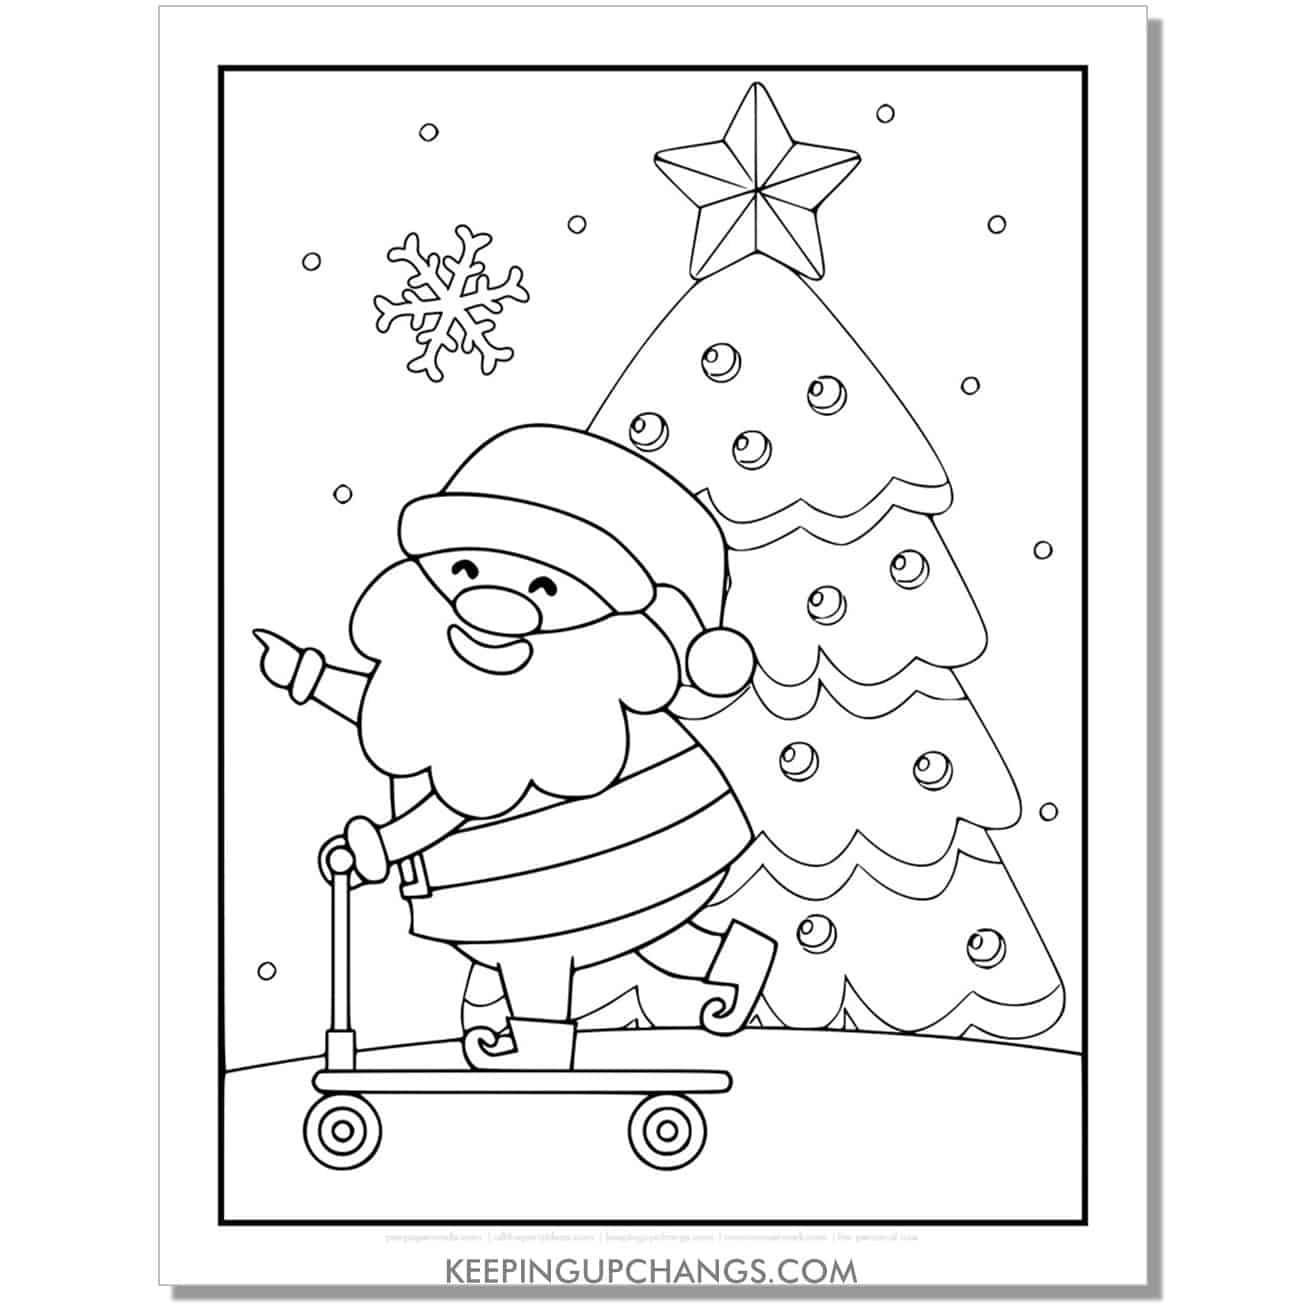 https://keepingupchangs.com/wp-content/uploads/free-full-size-santa-scooter-christmas-tree-coloring-page-colouring-sheet.jpg